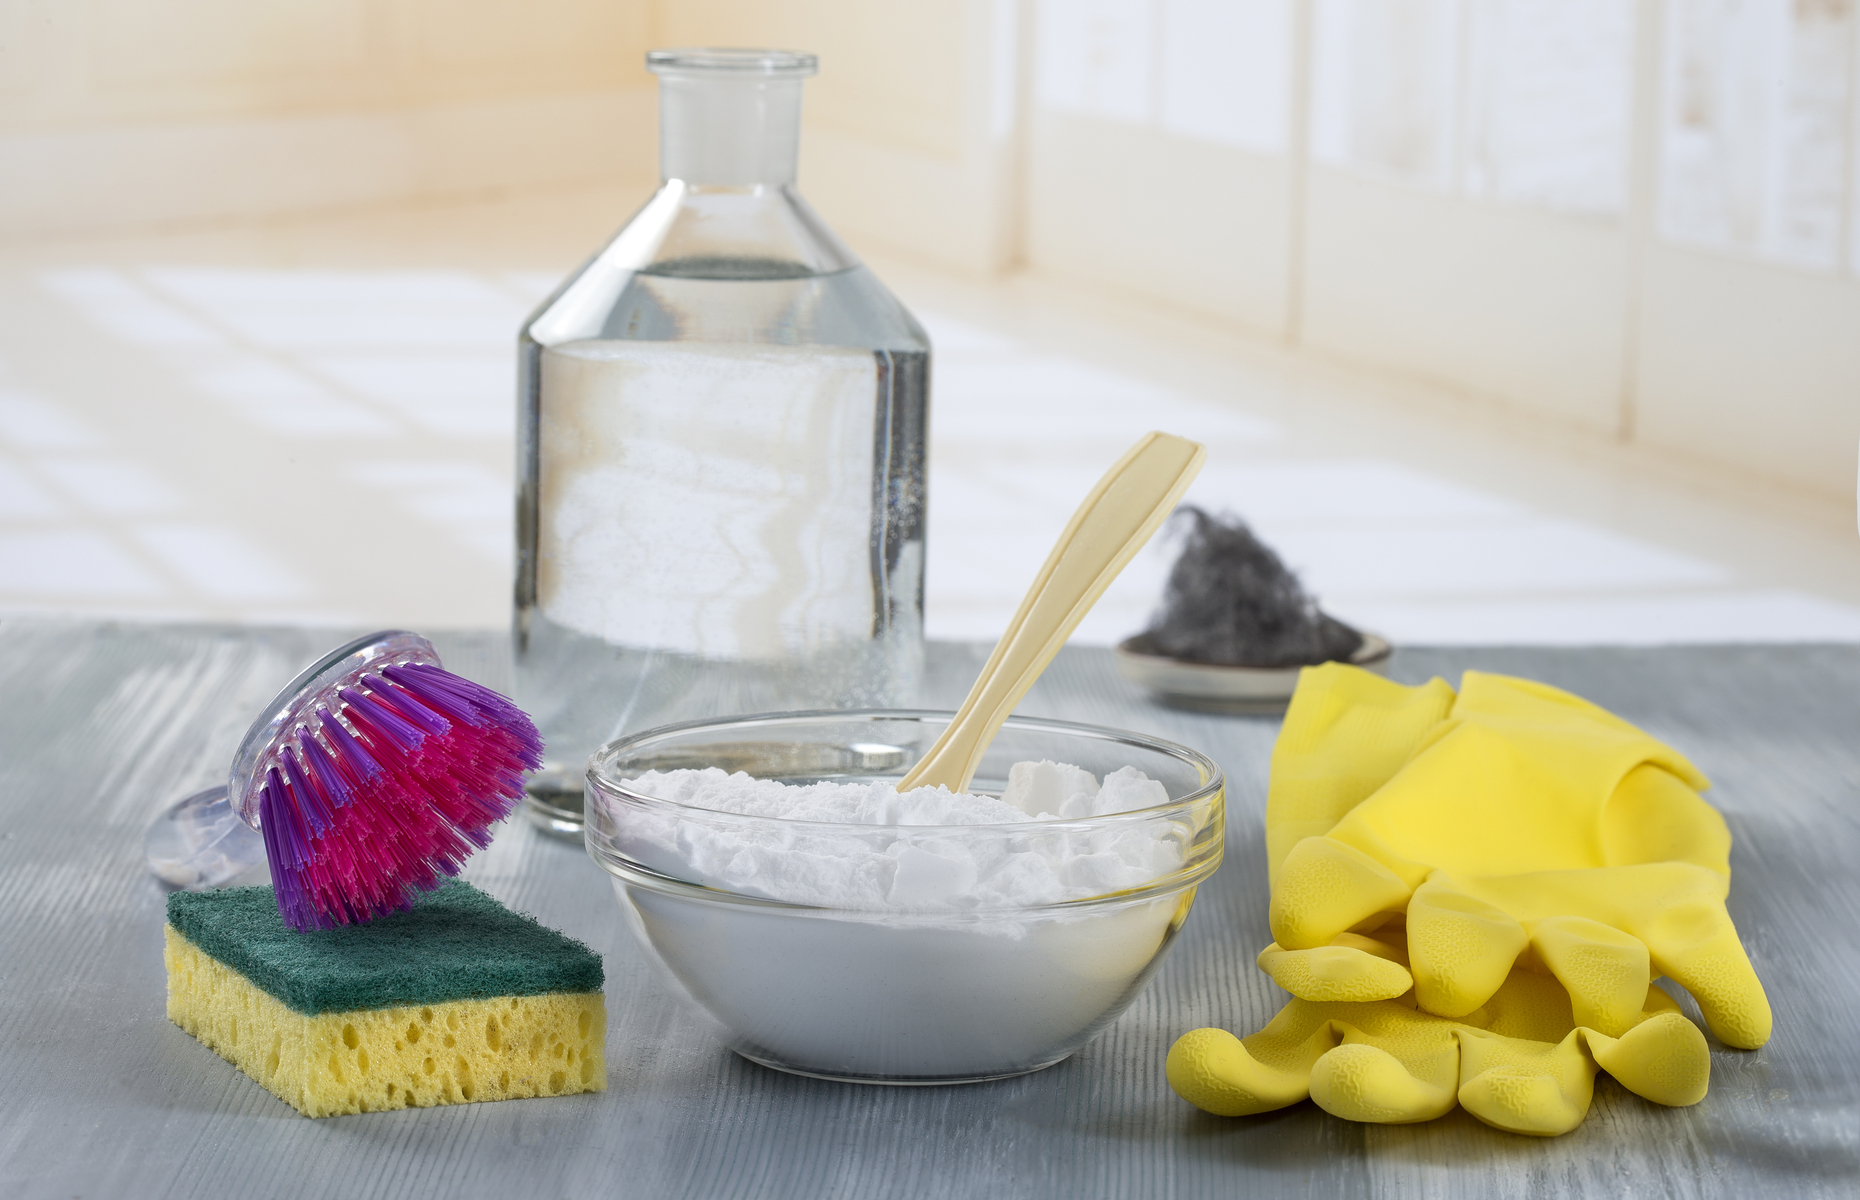 Natural cleaning products such as vinegar and baking soda can be just as effective as shop-bought products. Image: JPC-PROD / Shutterstock